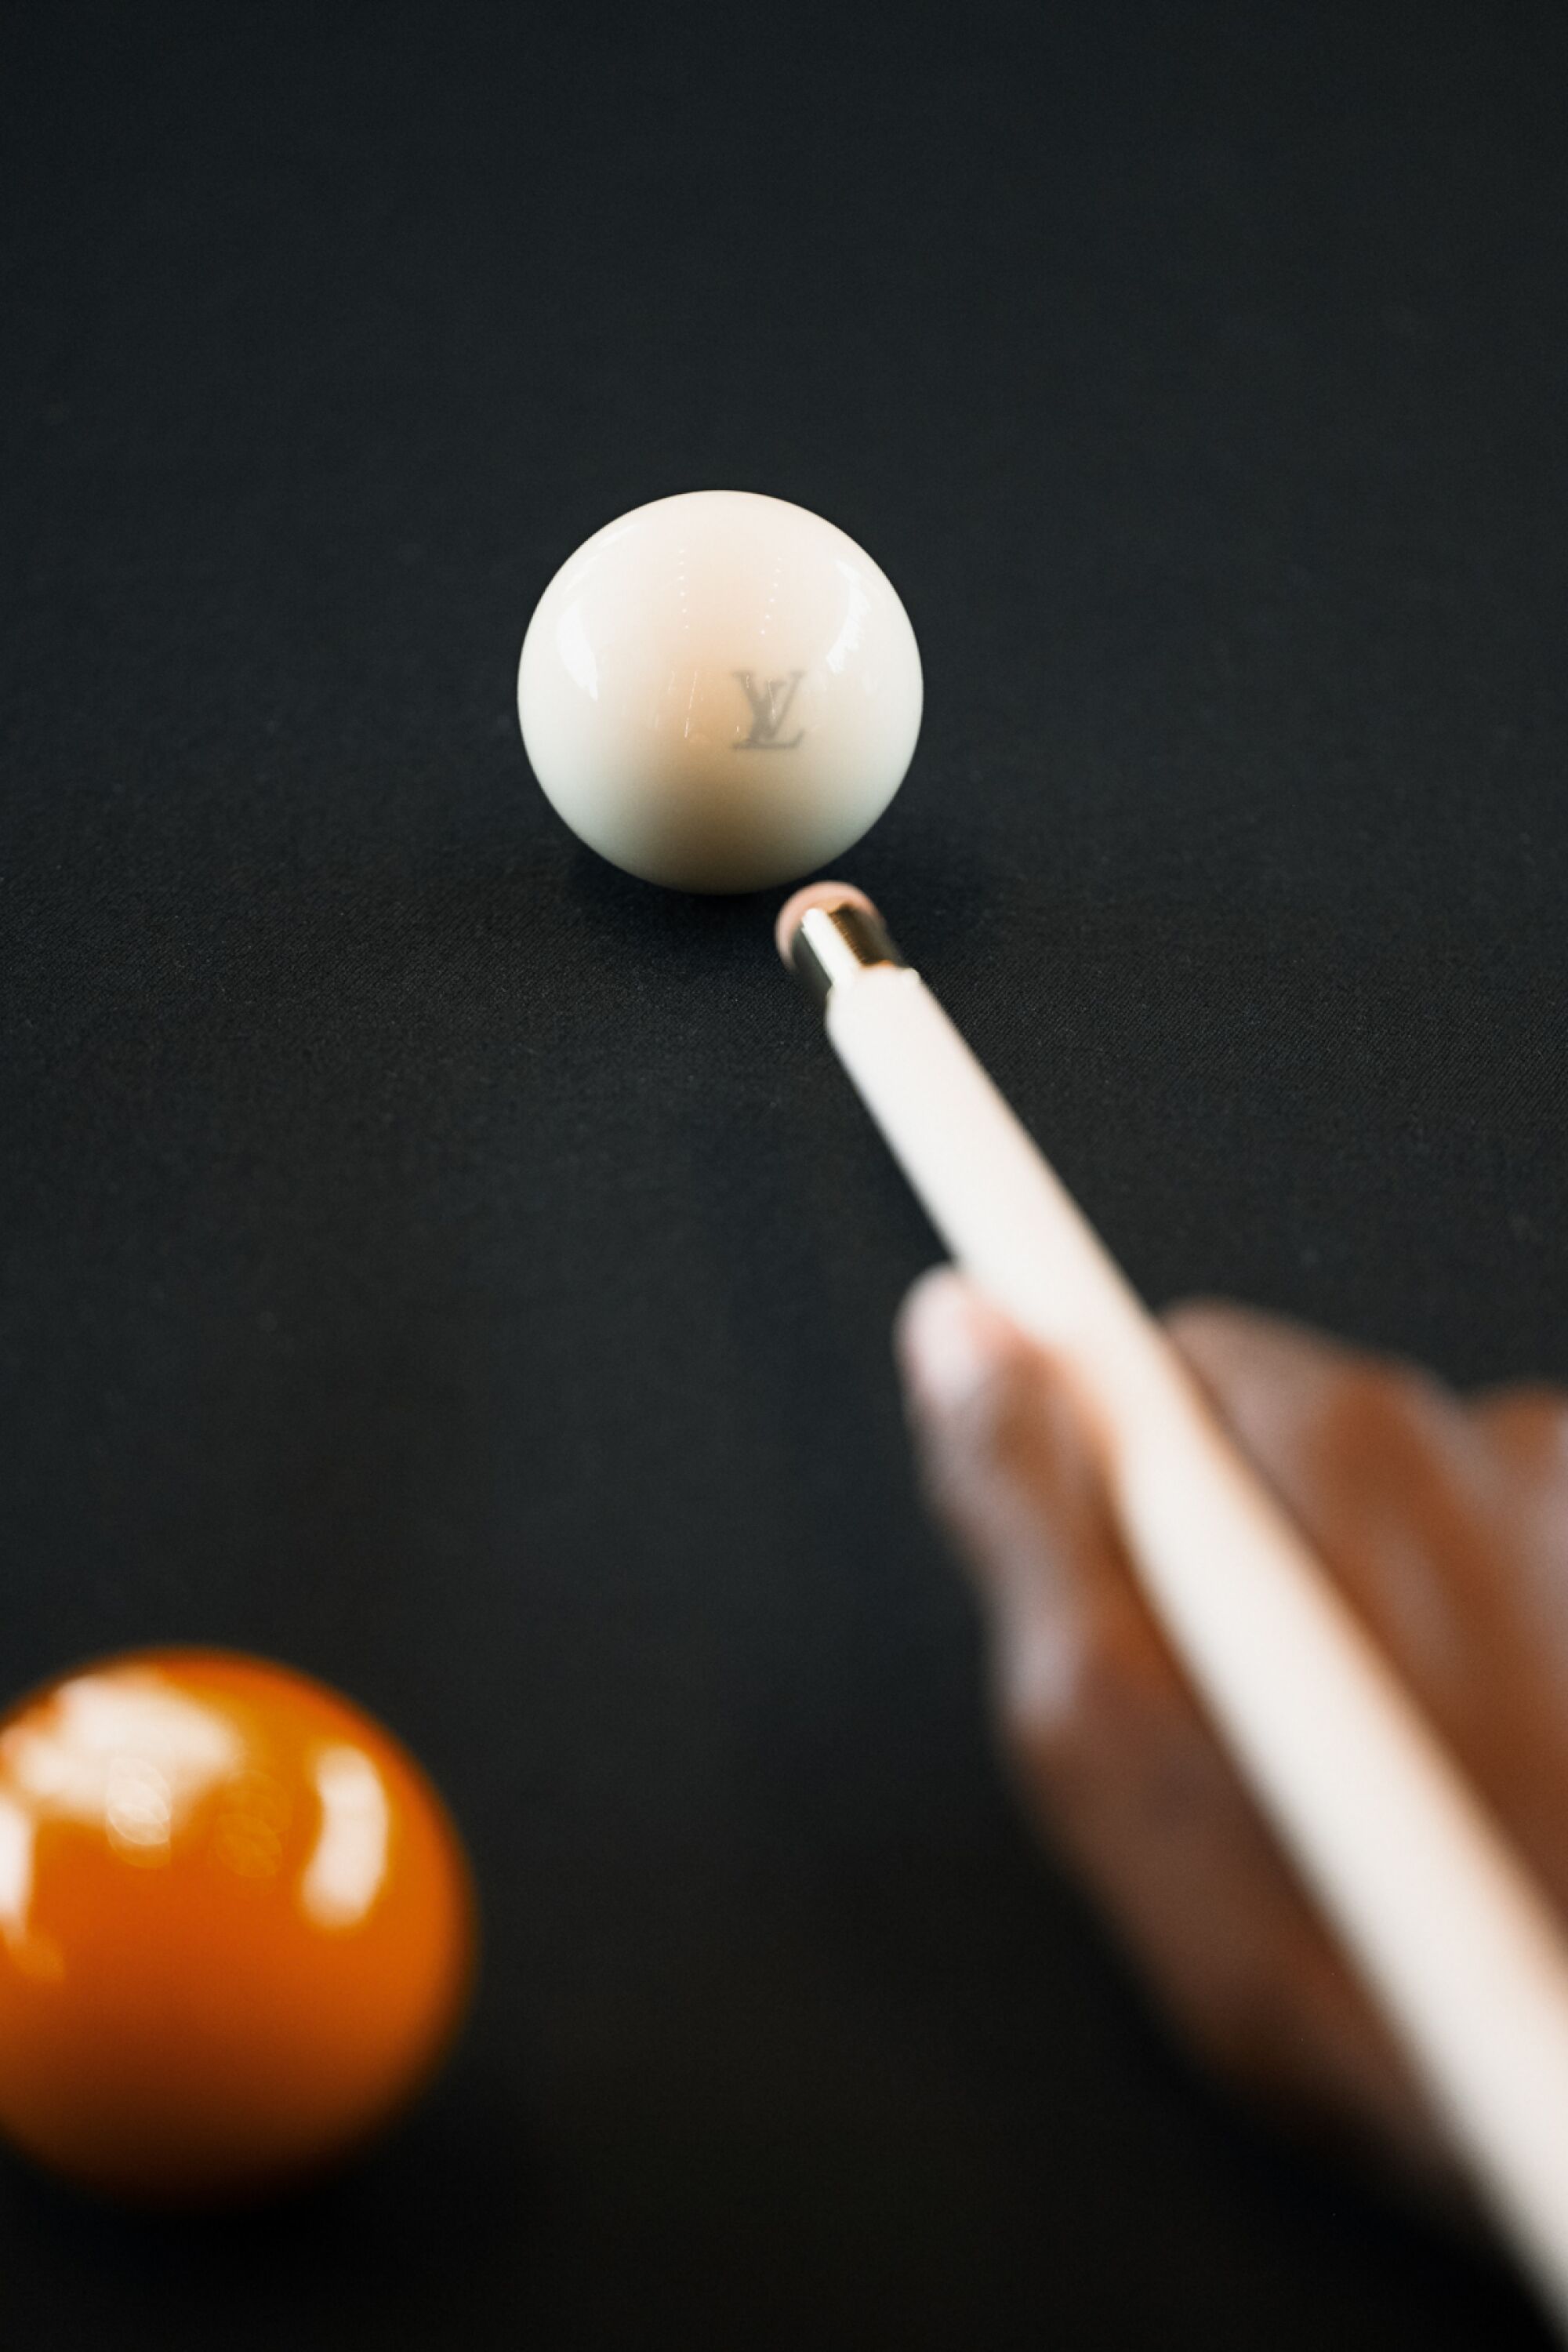 A pool cue aims at a white billiards ball.